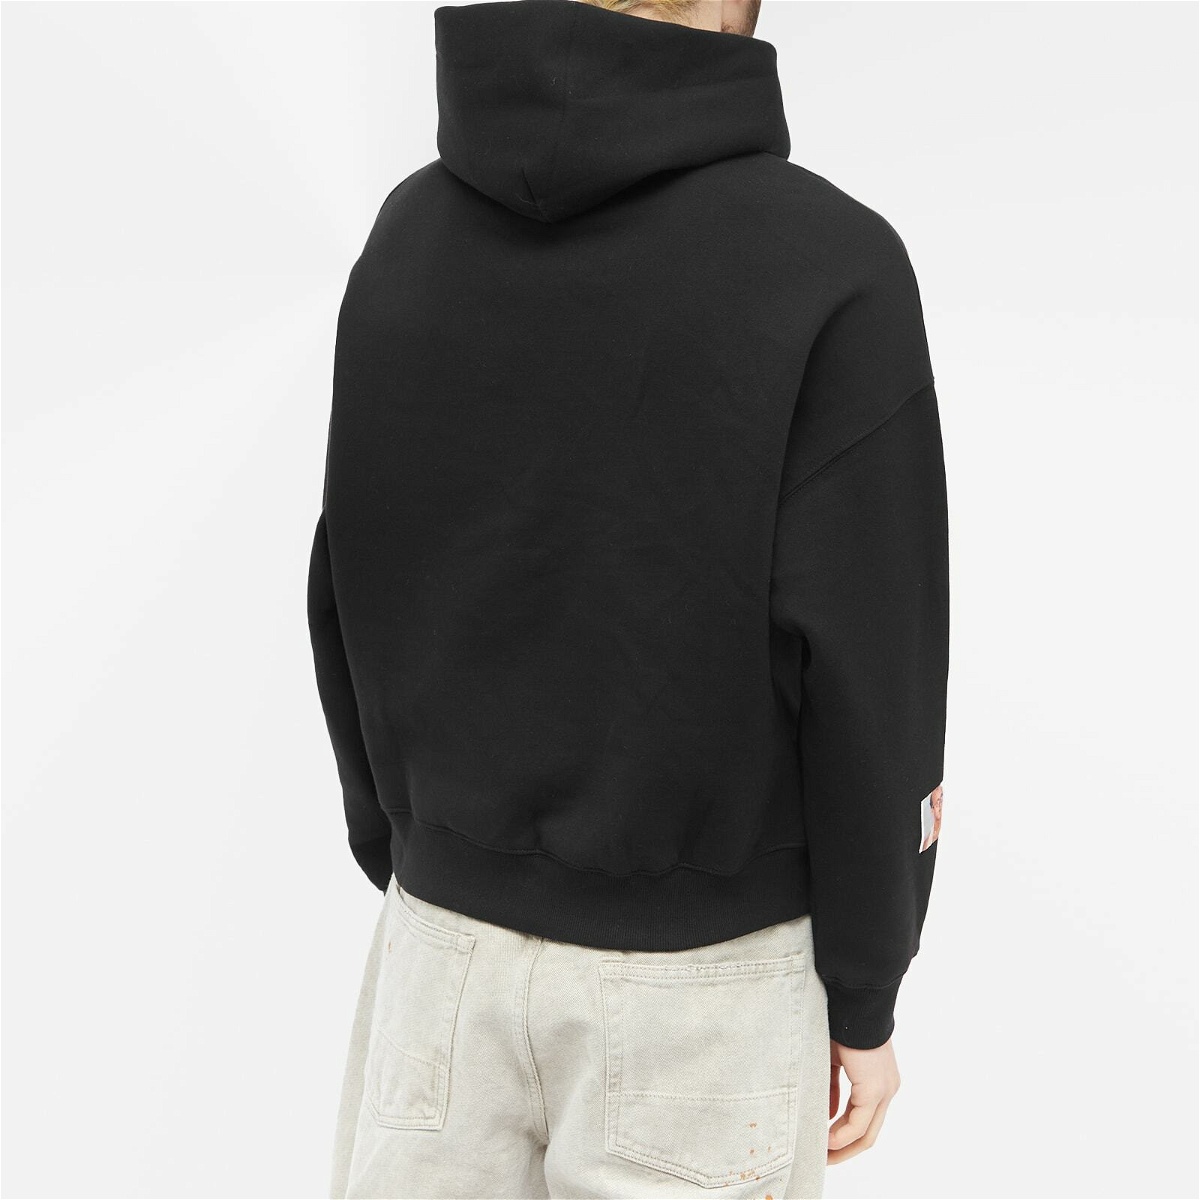 Jungles Jungles x Keith Haring Haring Chenille Hoody in Black Jungles ...